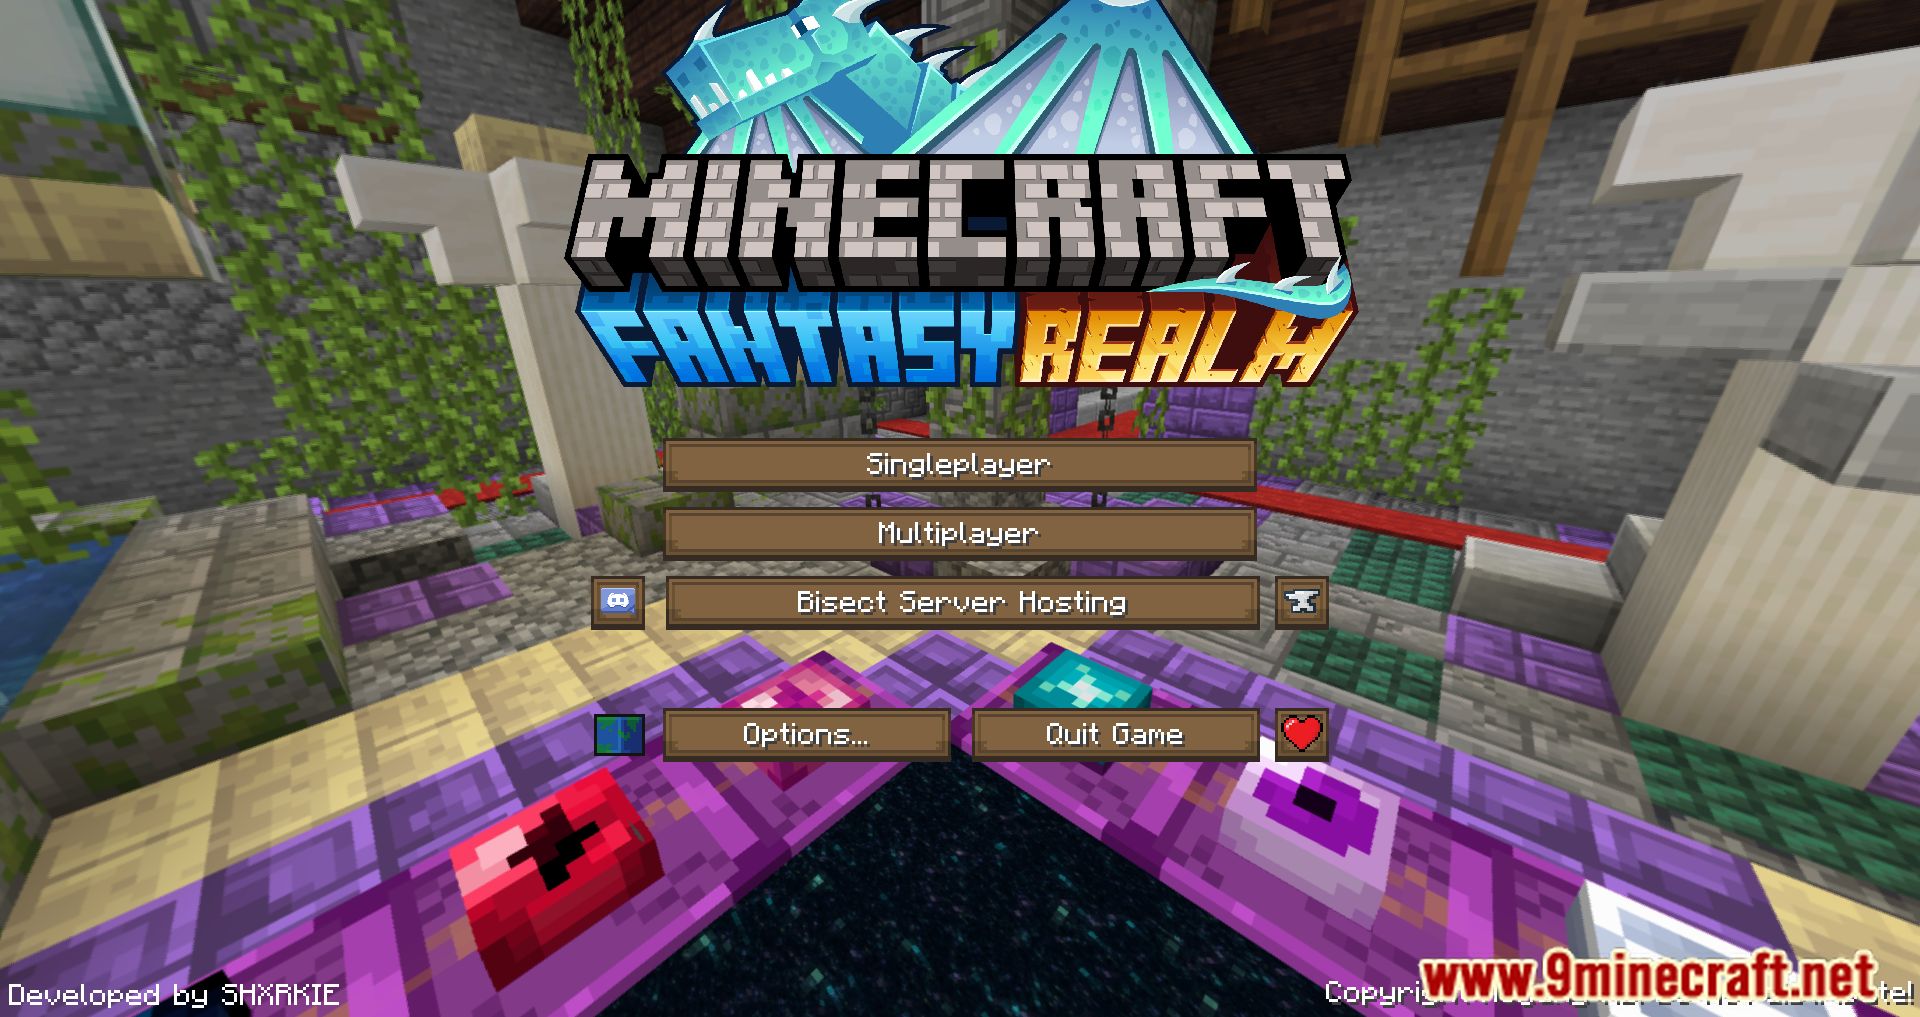 How can I open this screen in the modpack 'Fantasy Realm' I tried